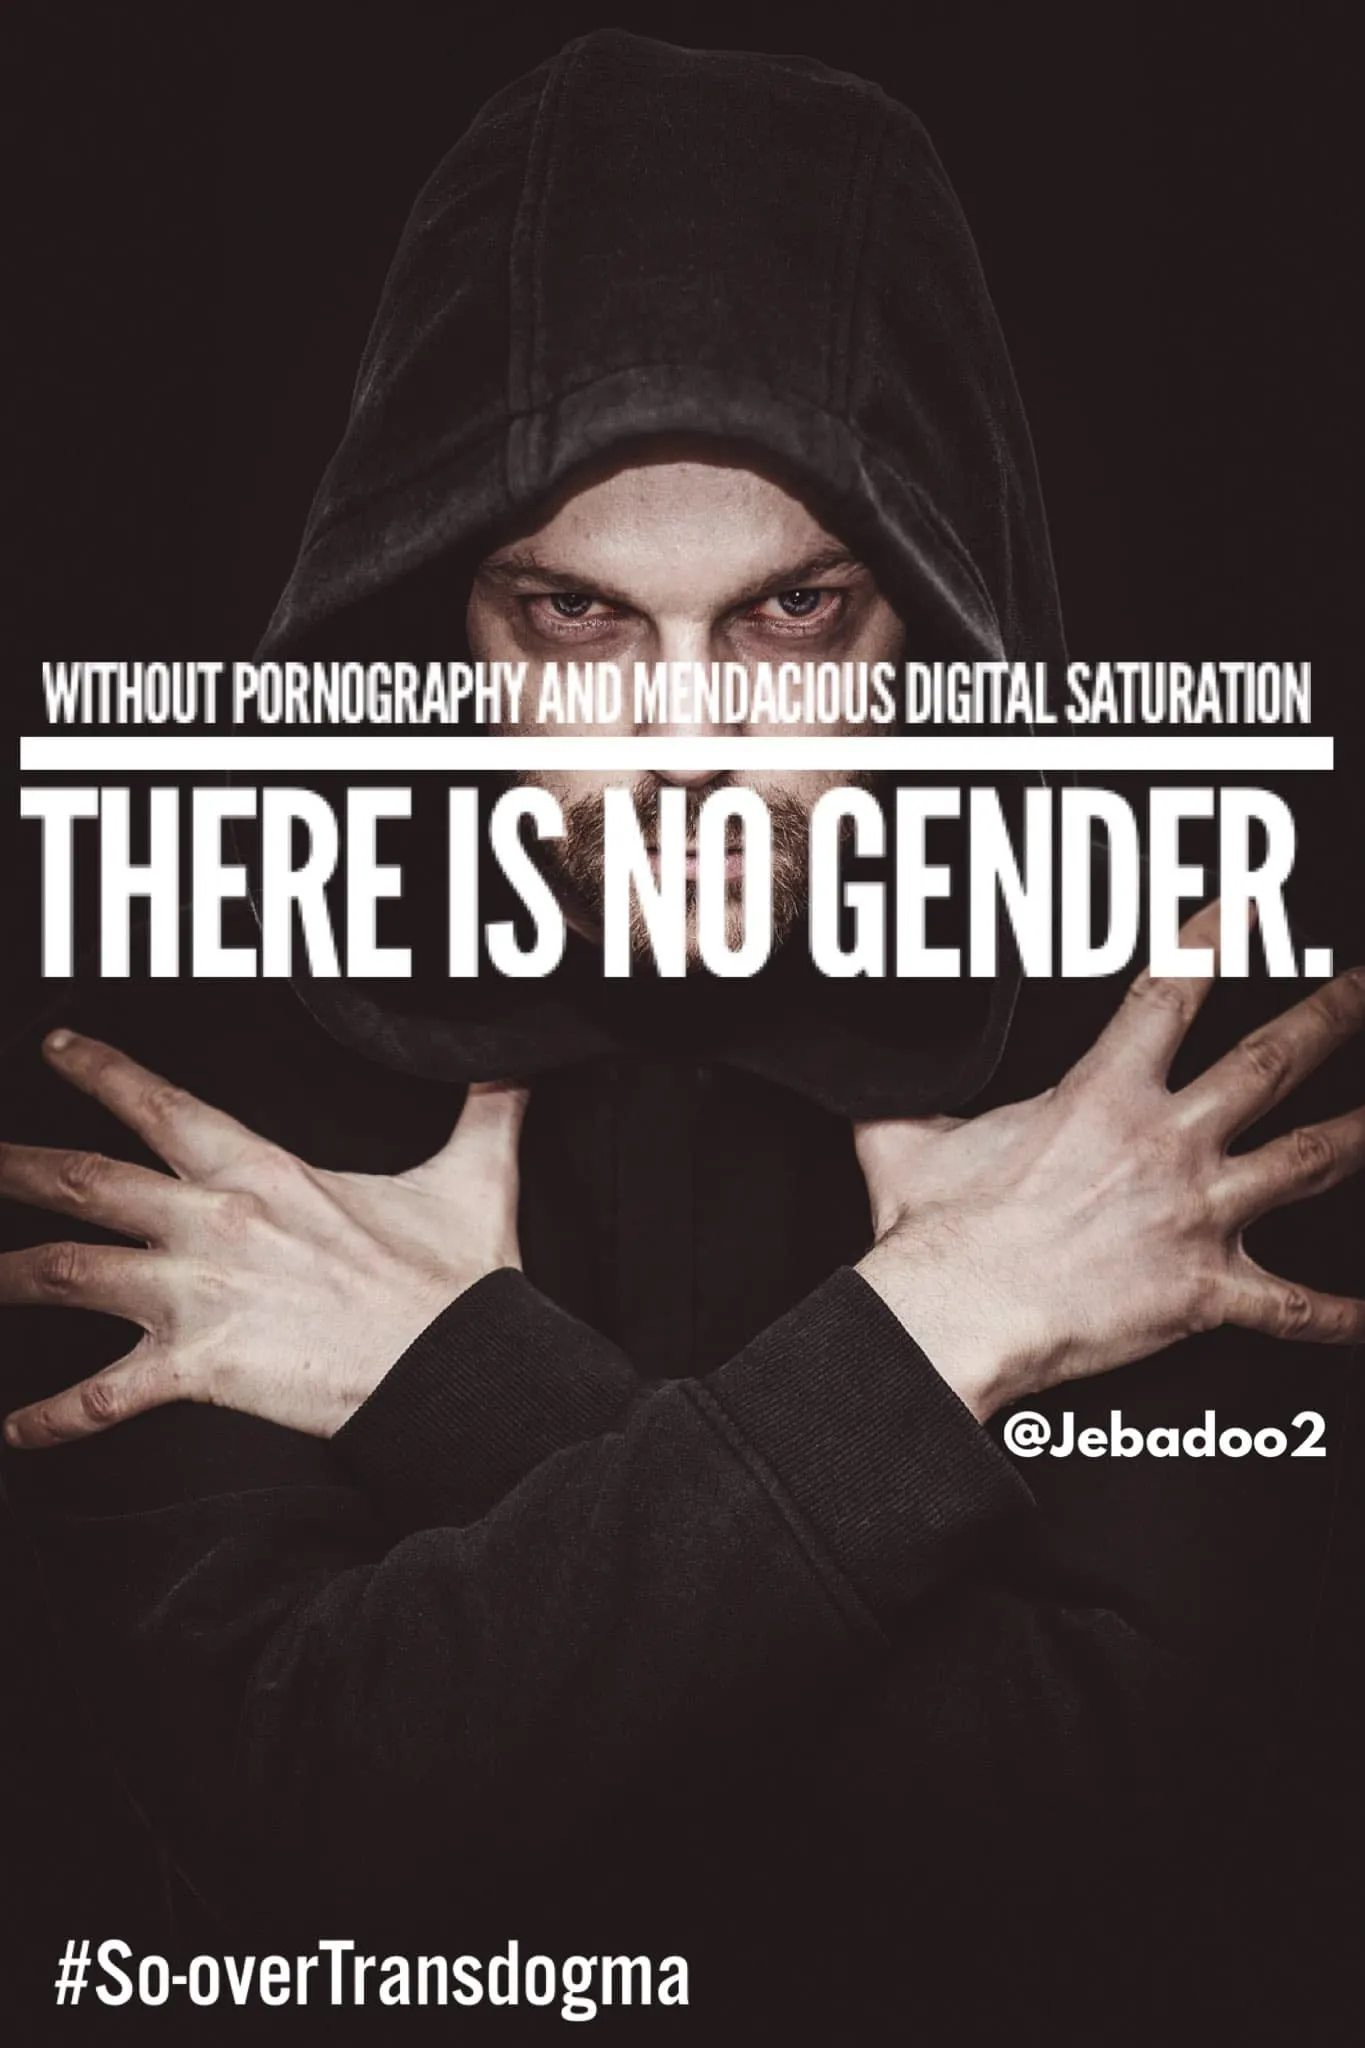 May be an image of 1 person and text that says 'WITHOUT PORNOGRAPHY AND MENDACIOUS DIGITAL SATURATION THERE IS NO GENDER. @Jebadoo2 #So-overTransdogma'